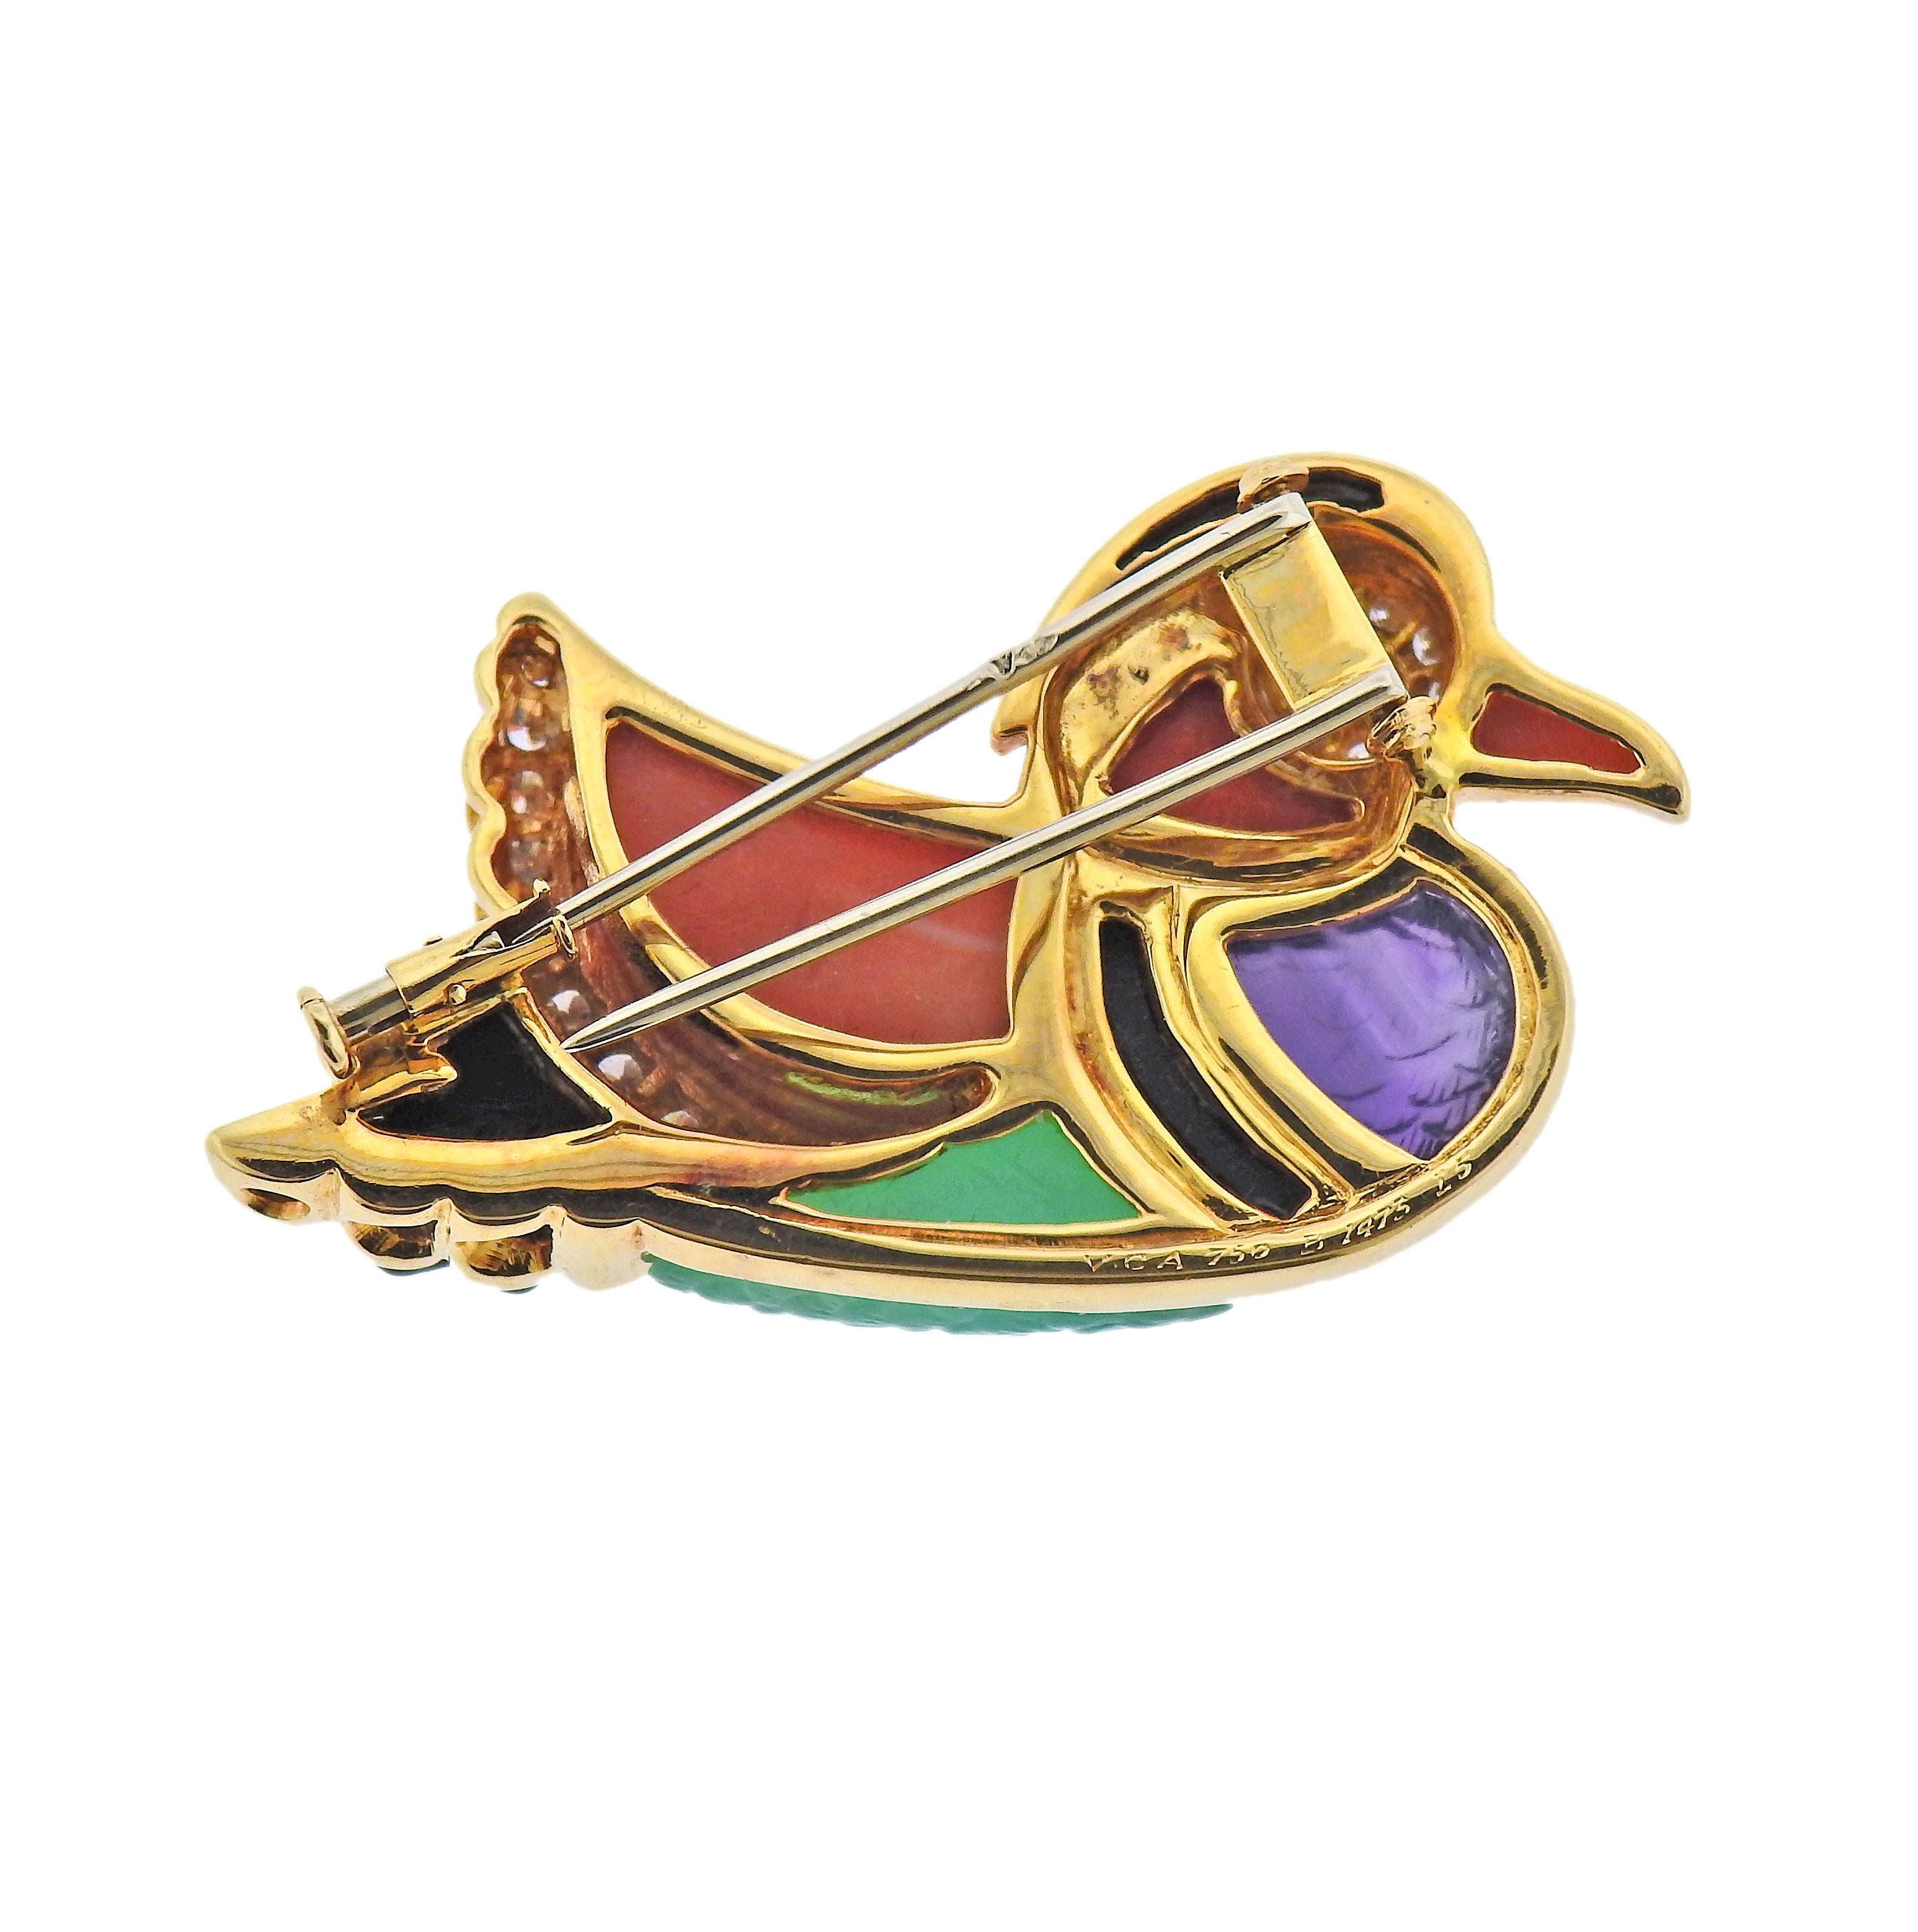 Van Cleef & Arpels duck brooch, set with approx. 0.70ctw in diamonds, onyx, carved coral, amethyst and chrysoprase. Brooch is 46mm x 30mm. Marked: VCA, 750, B 1473 I5. Weight - 23.4 grams. 